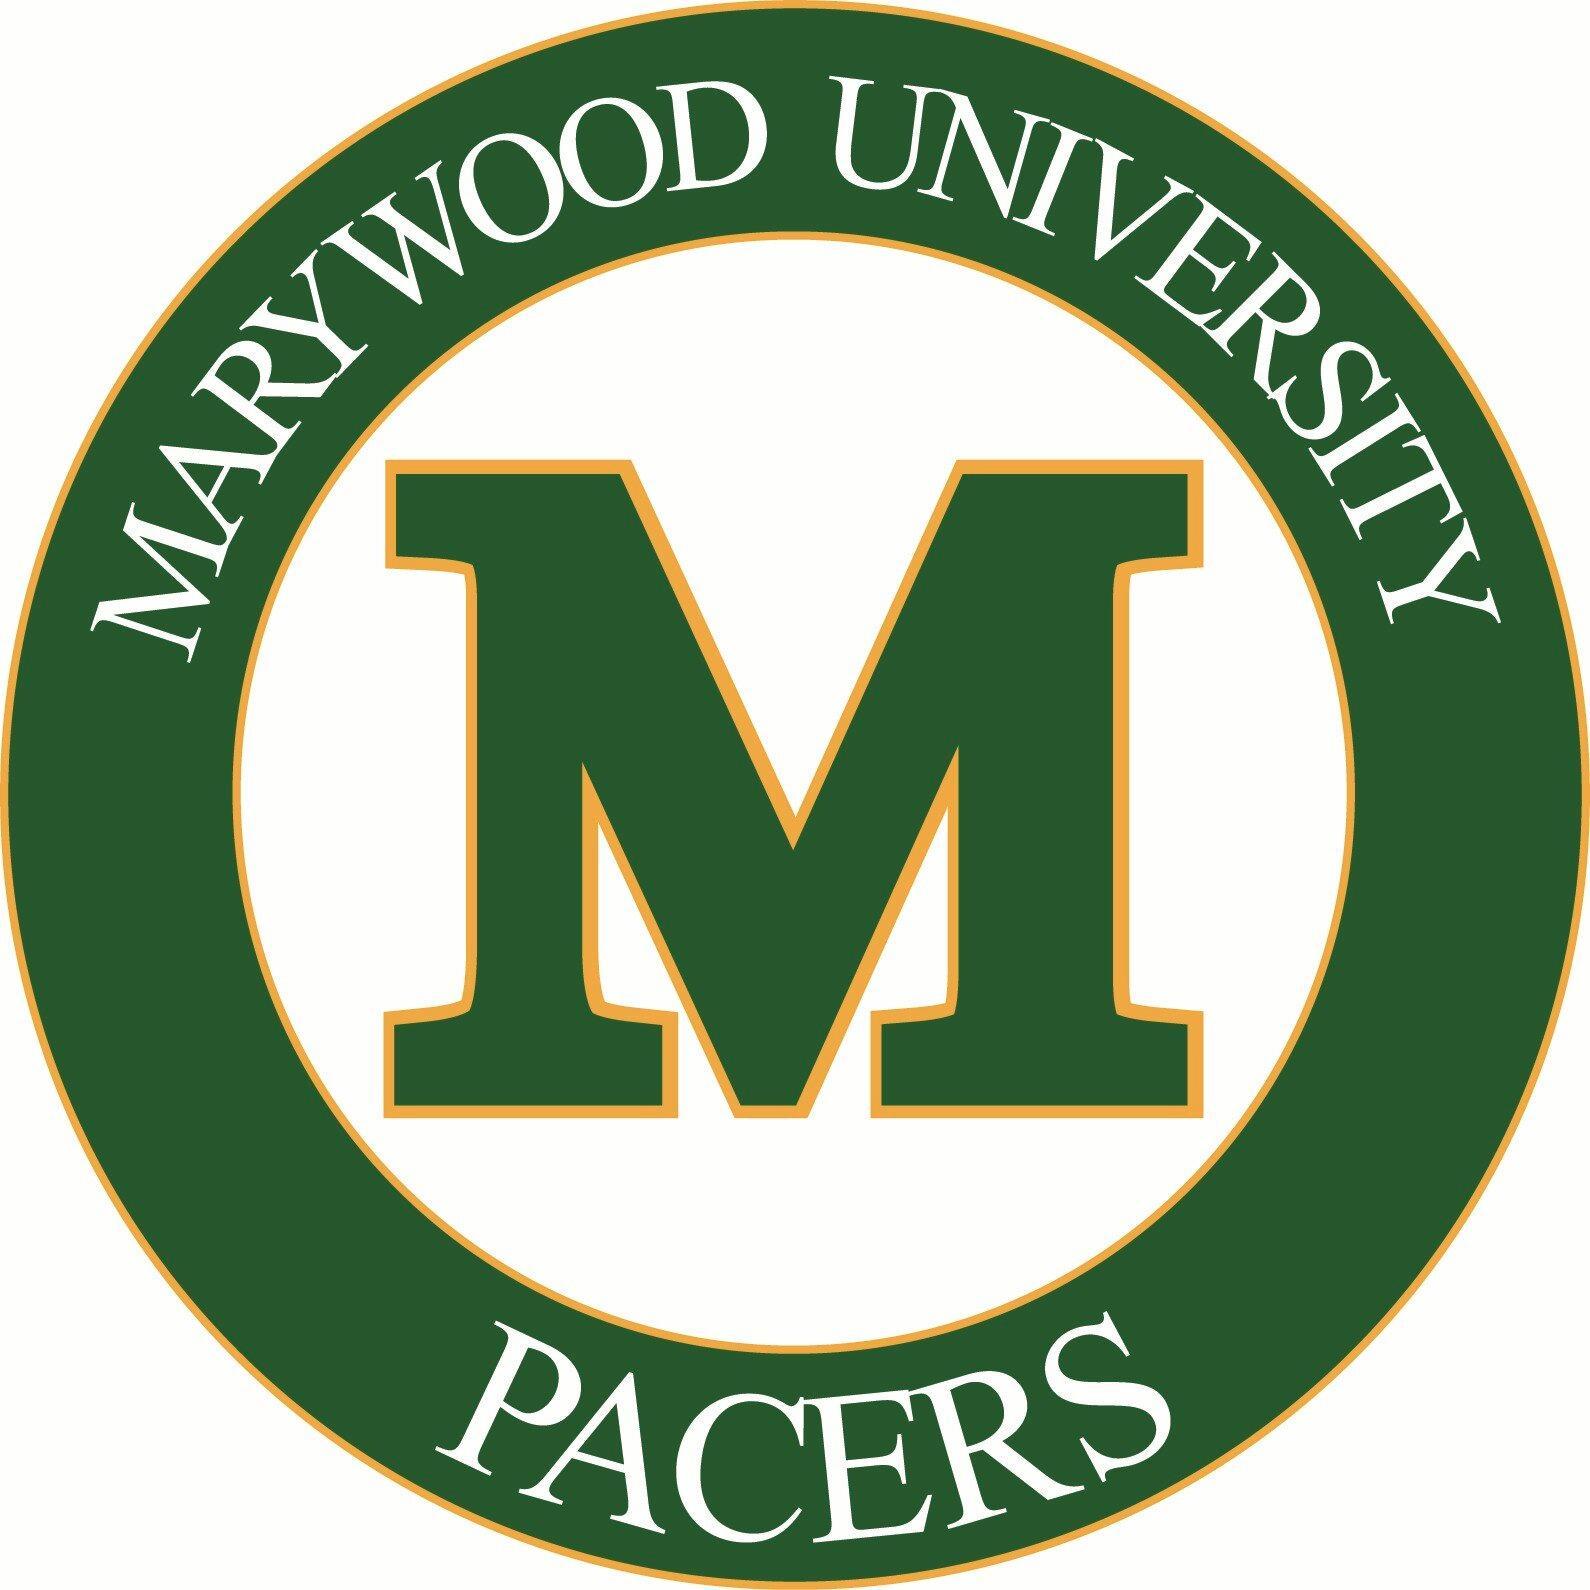 Official Twitter account for Marywood's School of Business and Global Innovation